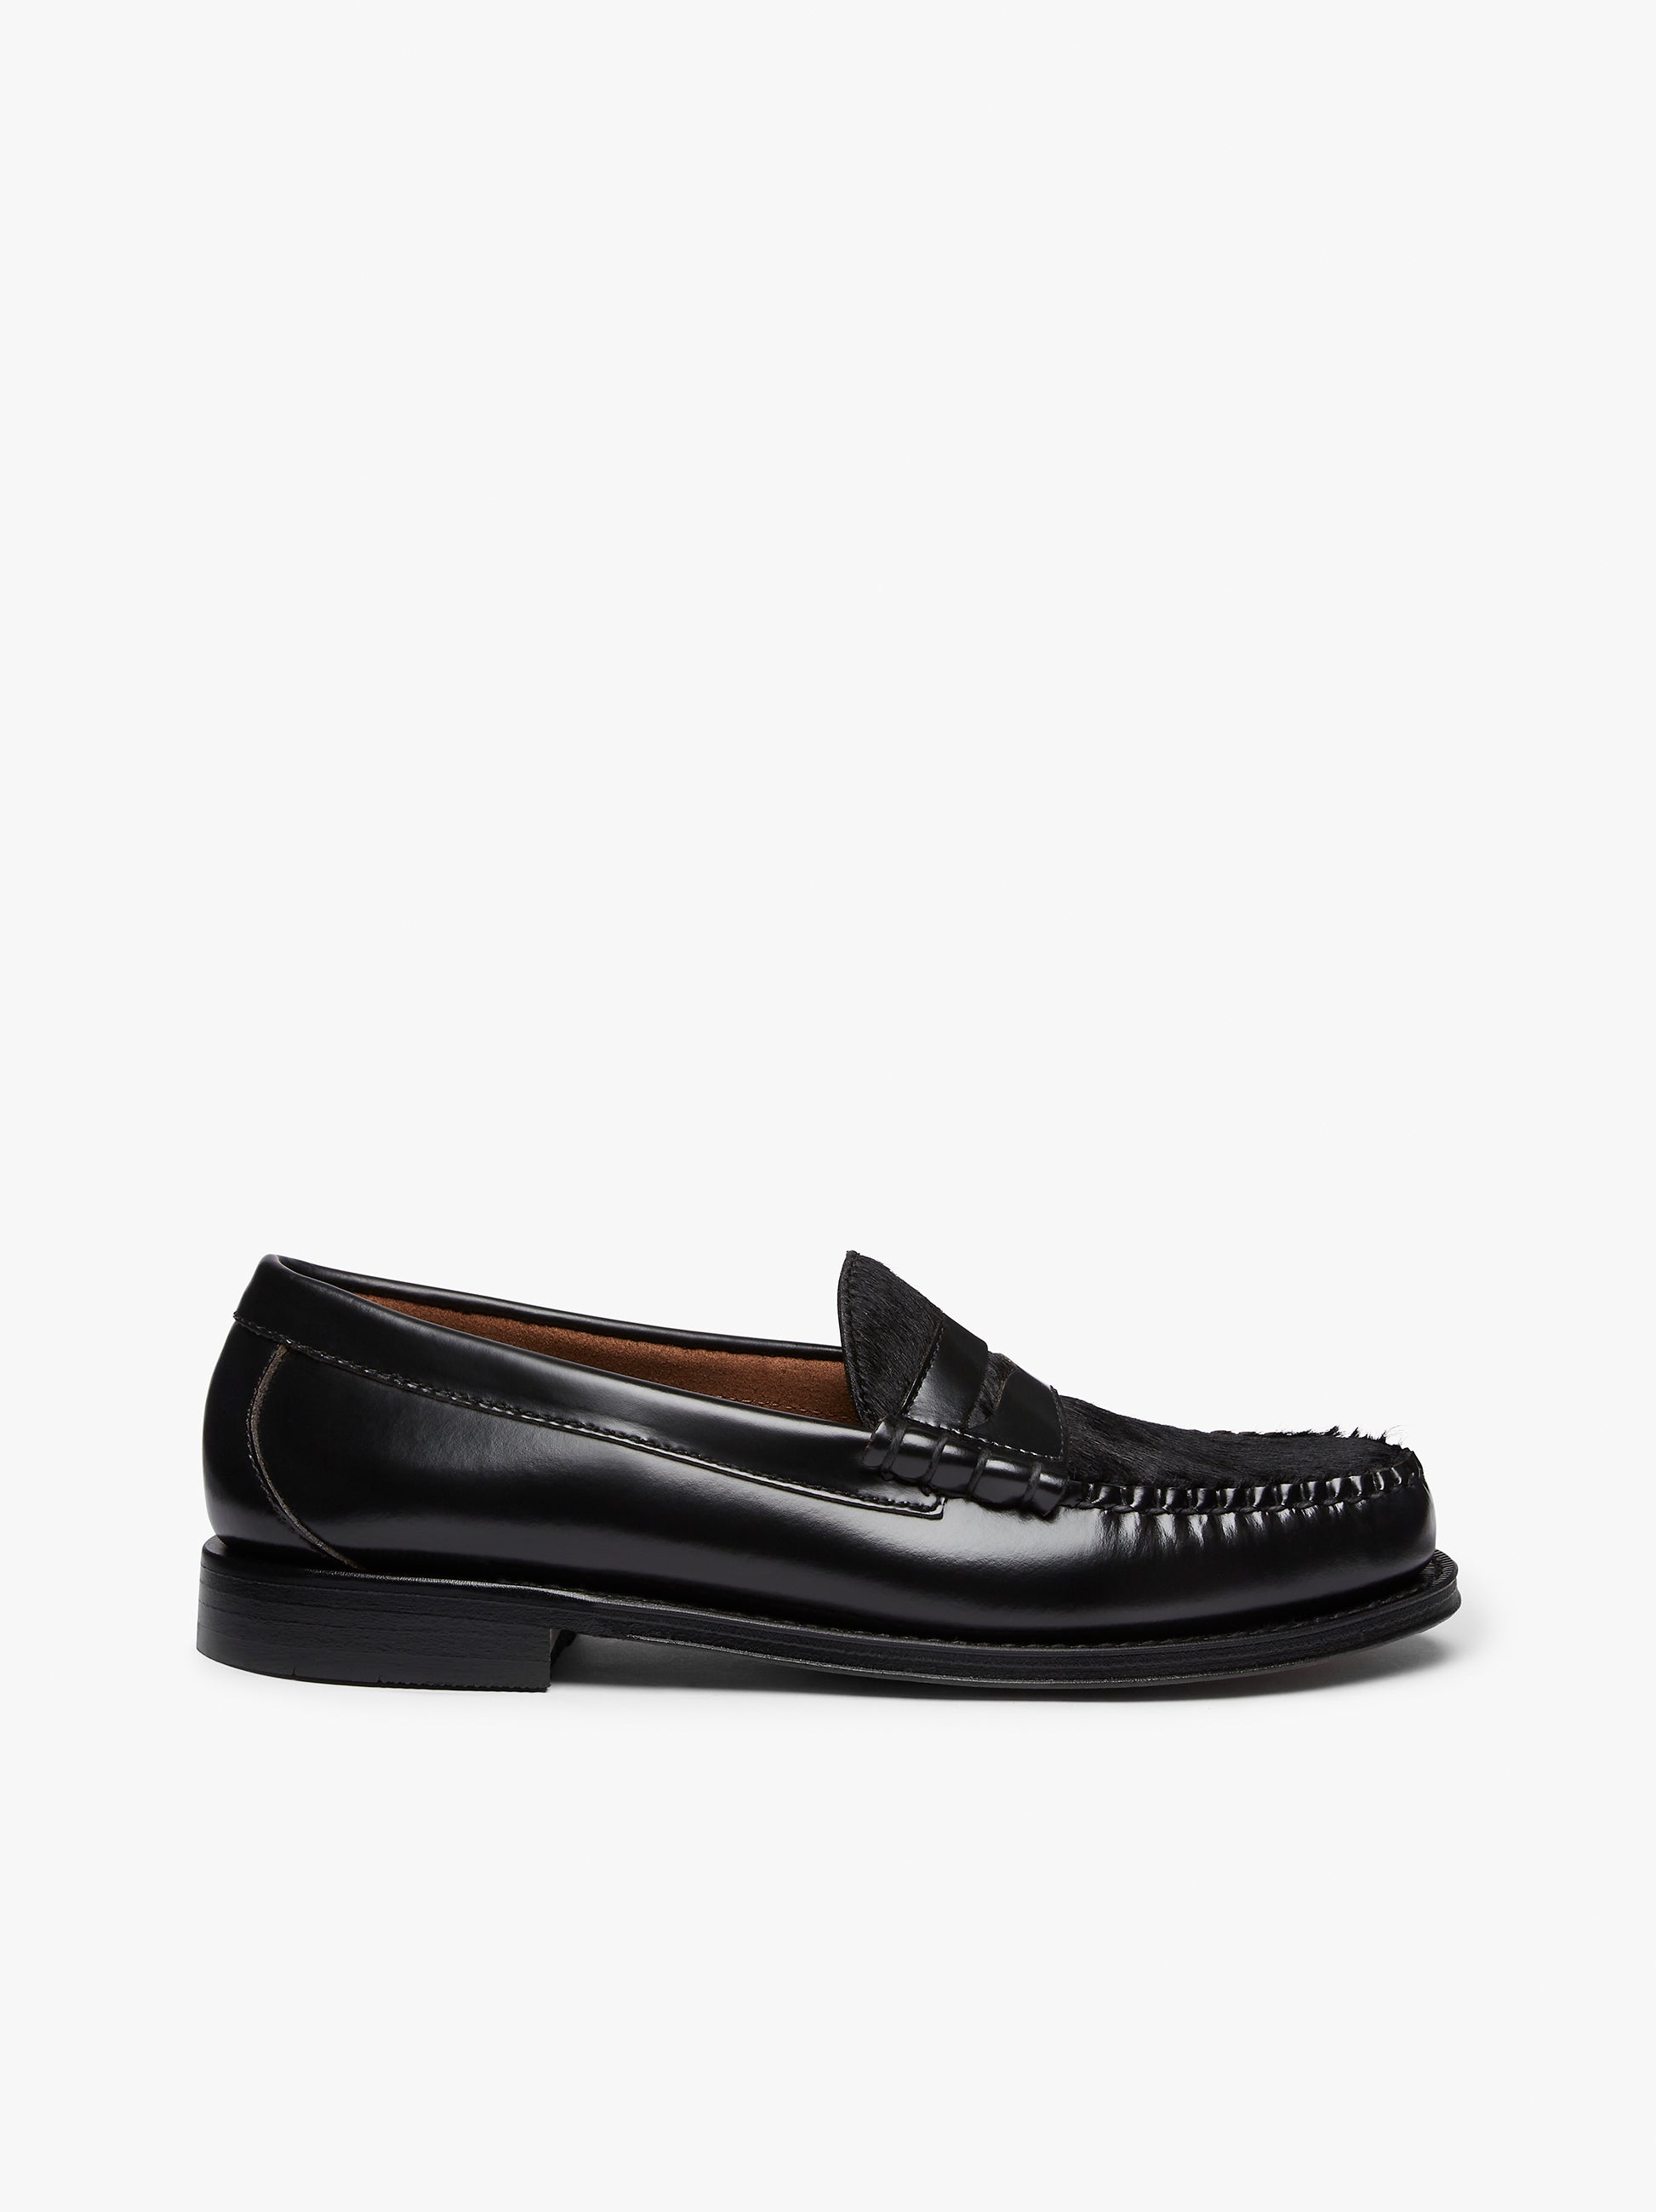 Weejuns Larson Penny Loafers Black Leather | Mens Black Loafers 